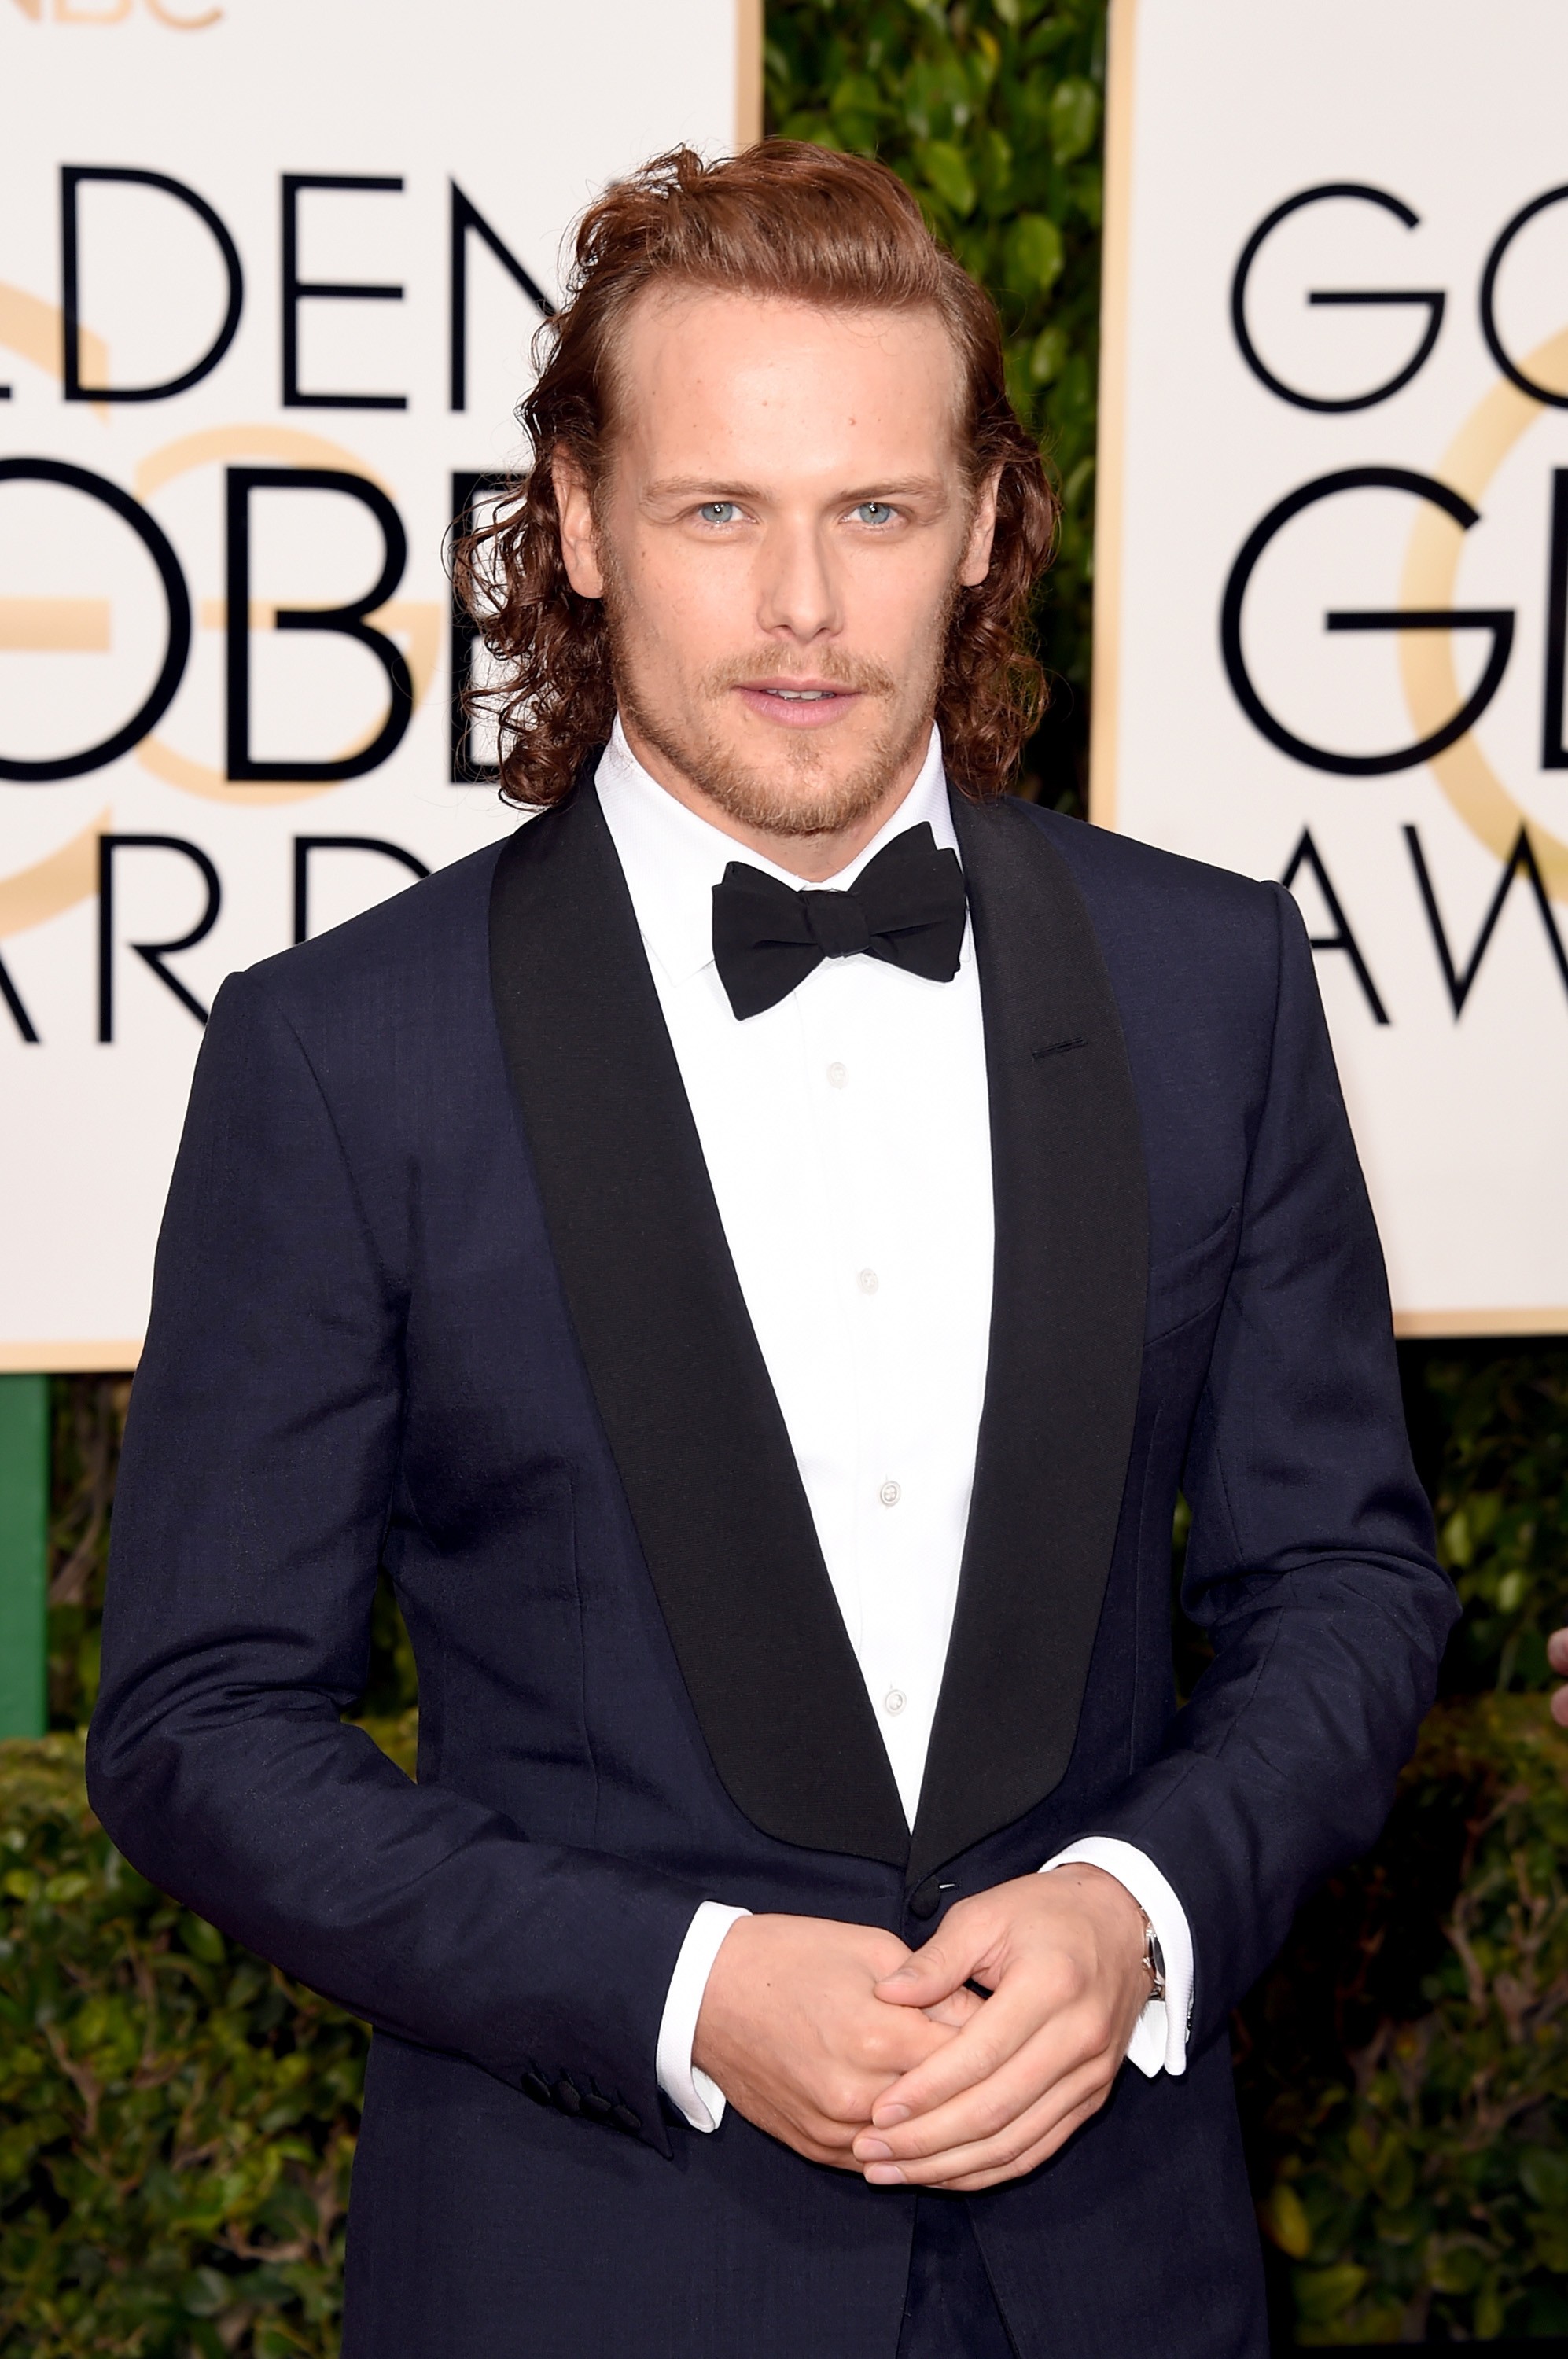 BEVERLY HILLS, CA - JANUARY 10:  Actor Sam Heughan attends the 73rd Annual Golden Globe Awards held at the Beverly Hilton Hotel on January 10, 2016 in Beverly Hills, California.  (Photo by Jason Merritt/Getty Images) (Foto: Getty Images)